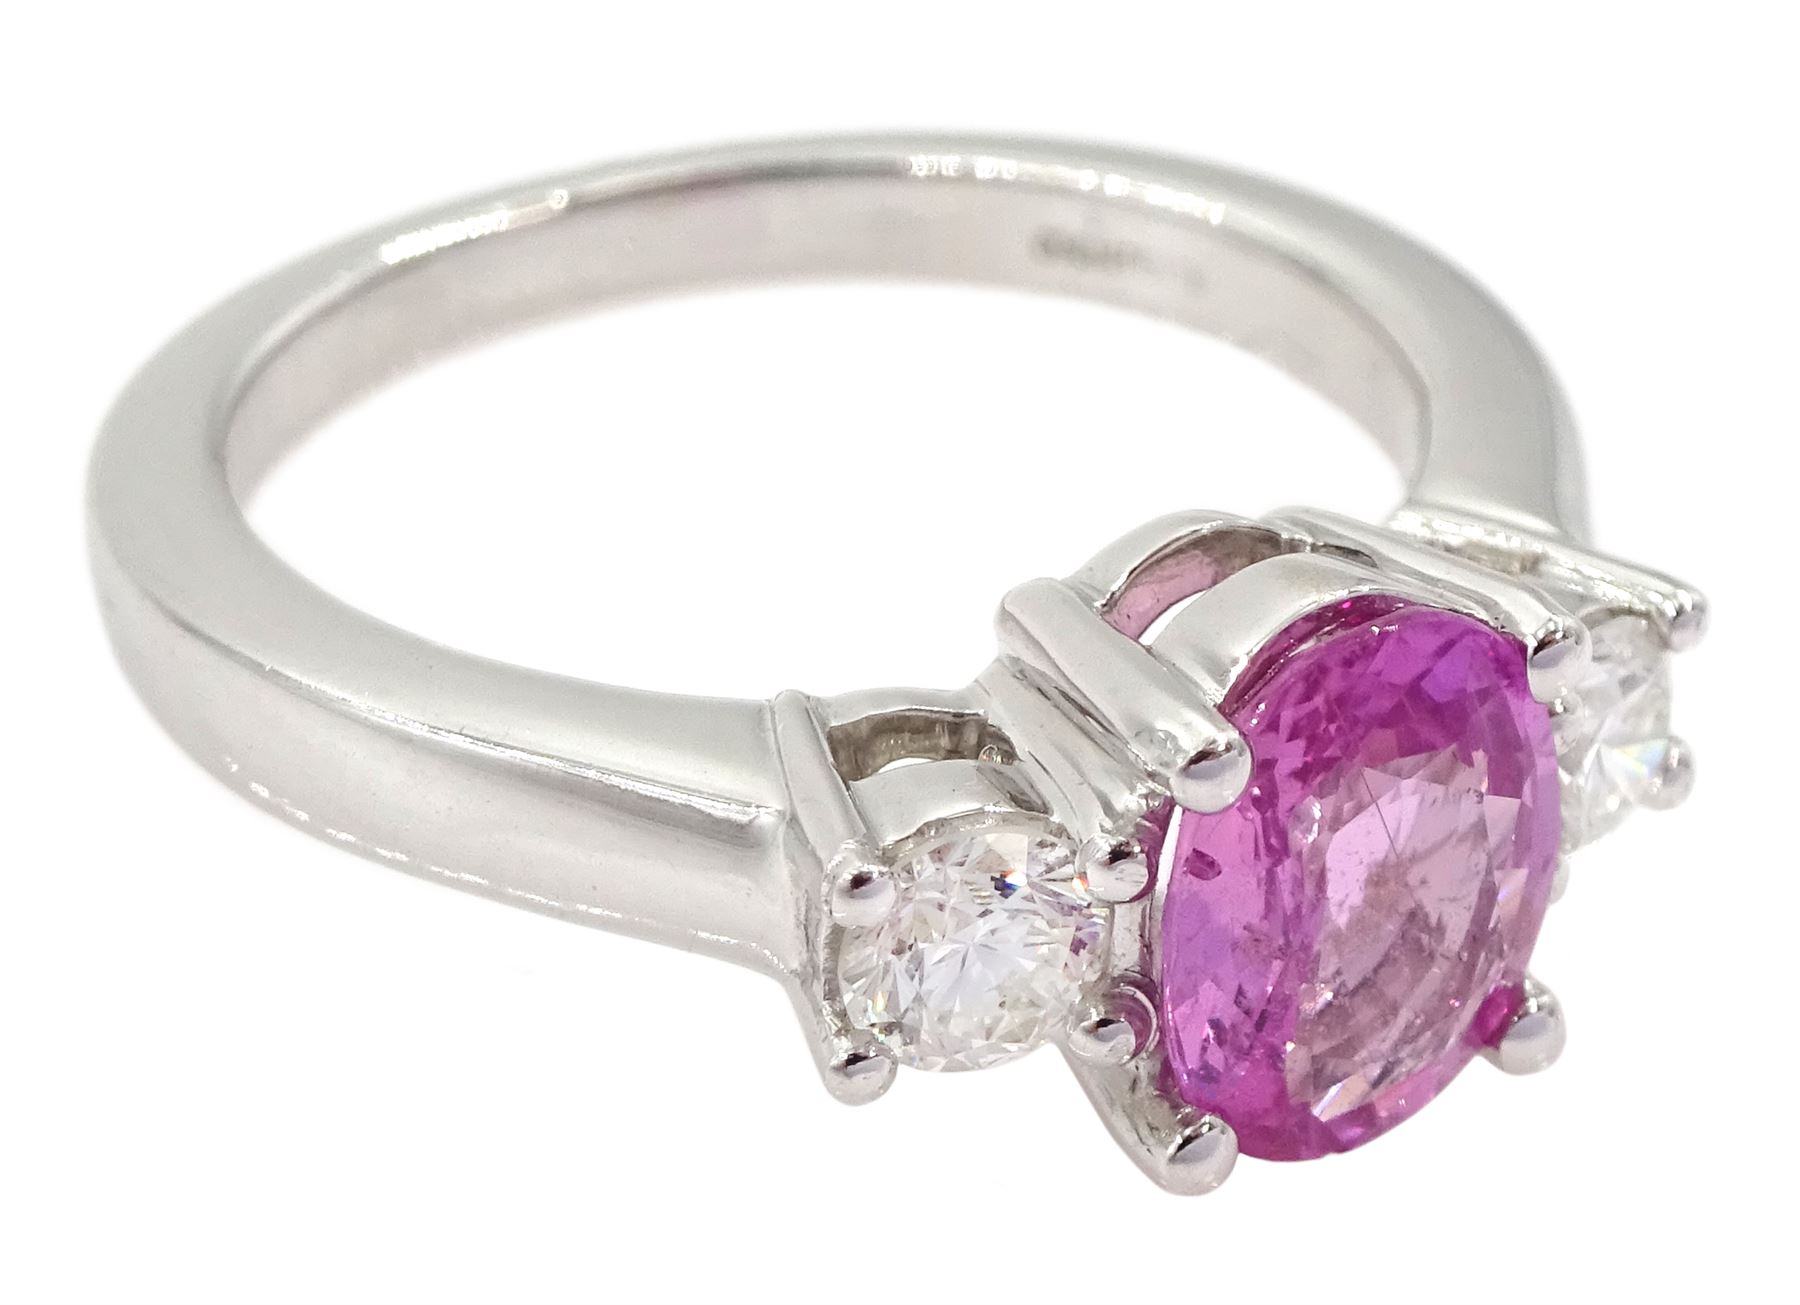 18ct white gold three stone oval cut pink sapphire and round brilliant cut diamond ring - Image 3 of 5